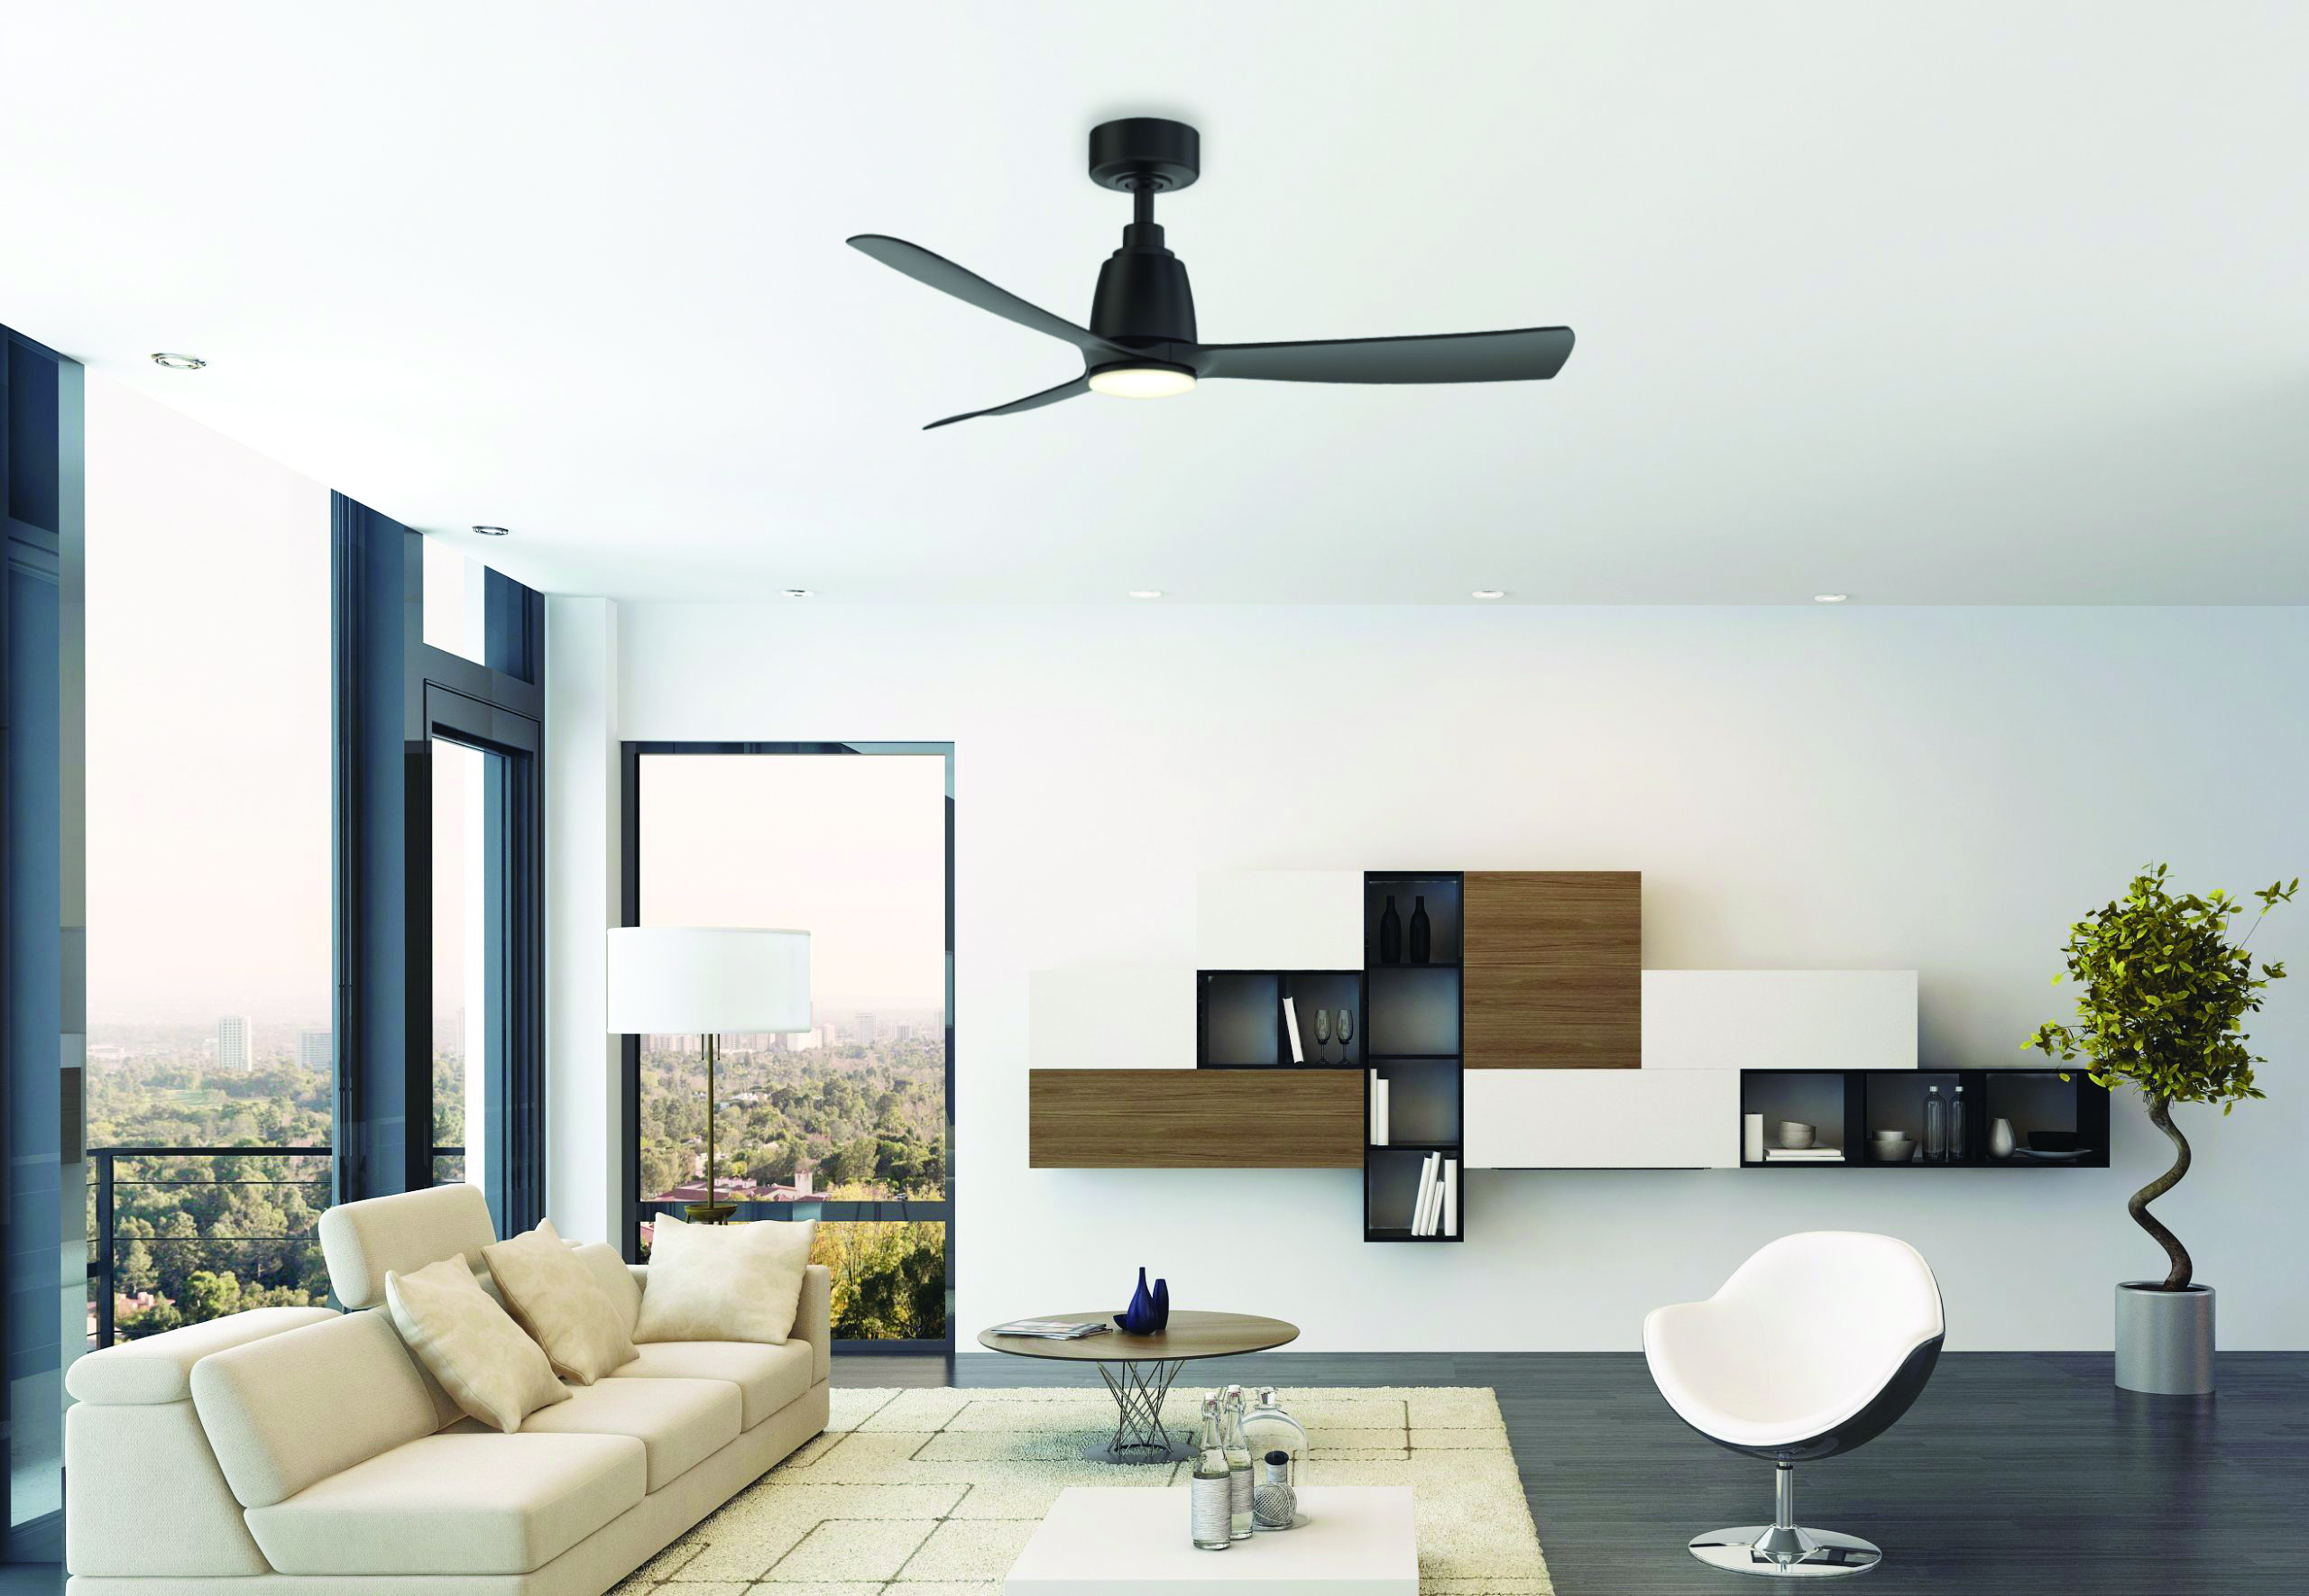 Fanimation’s Kute fan features a DC motor, a more energy-efficent choice that is now commonplace across the industry. 